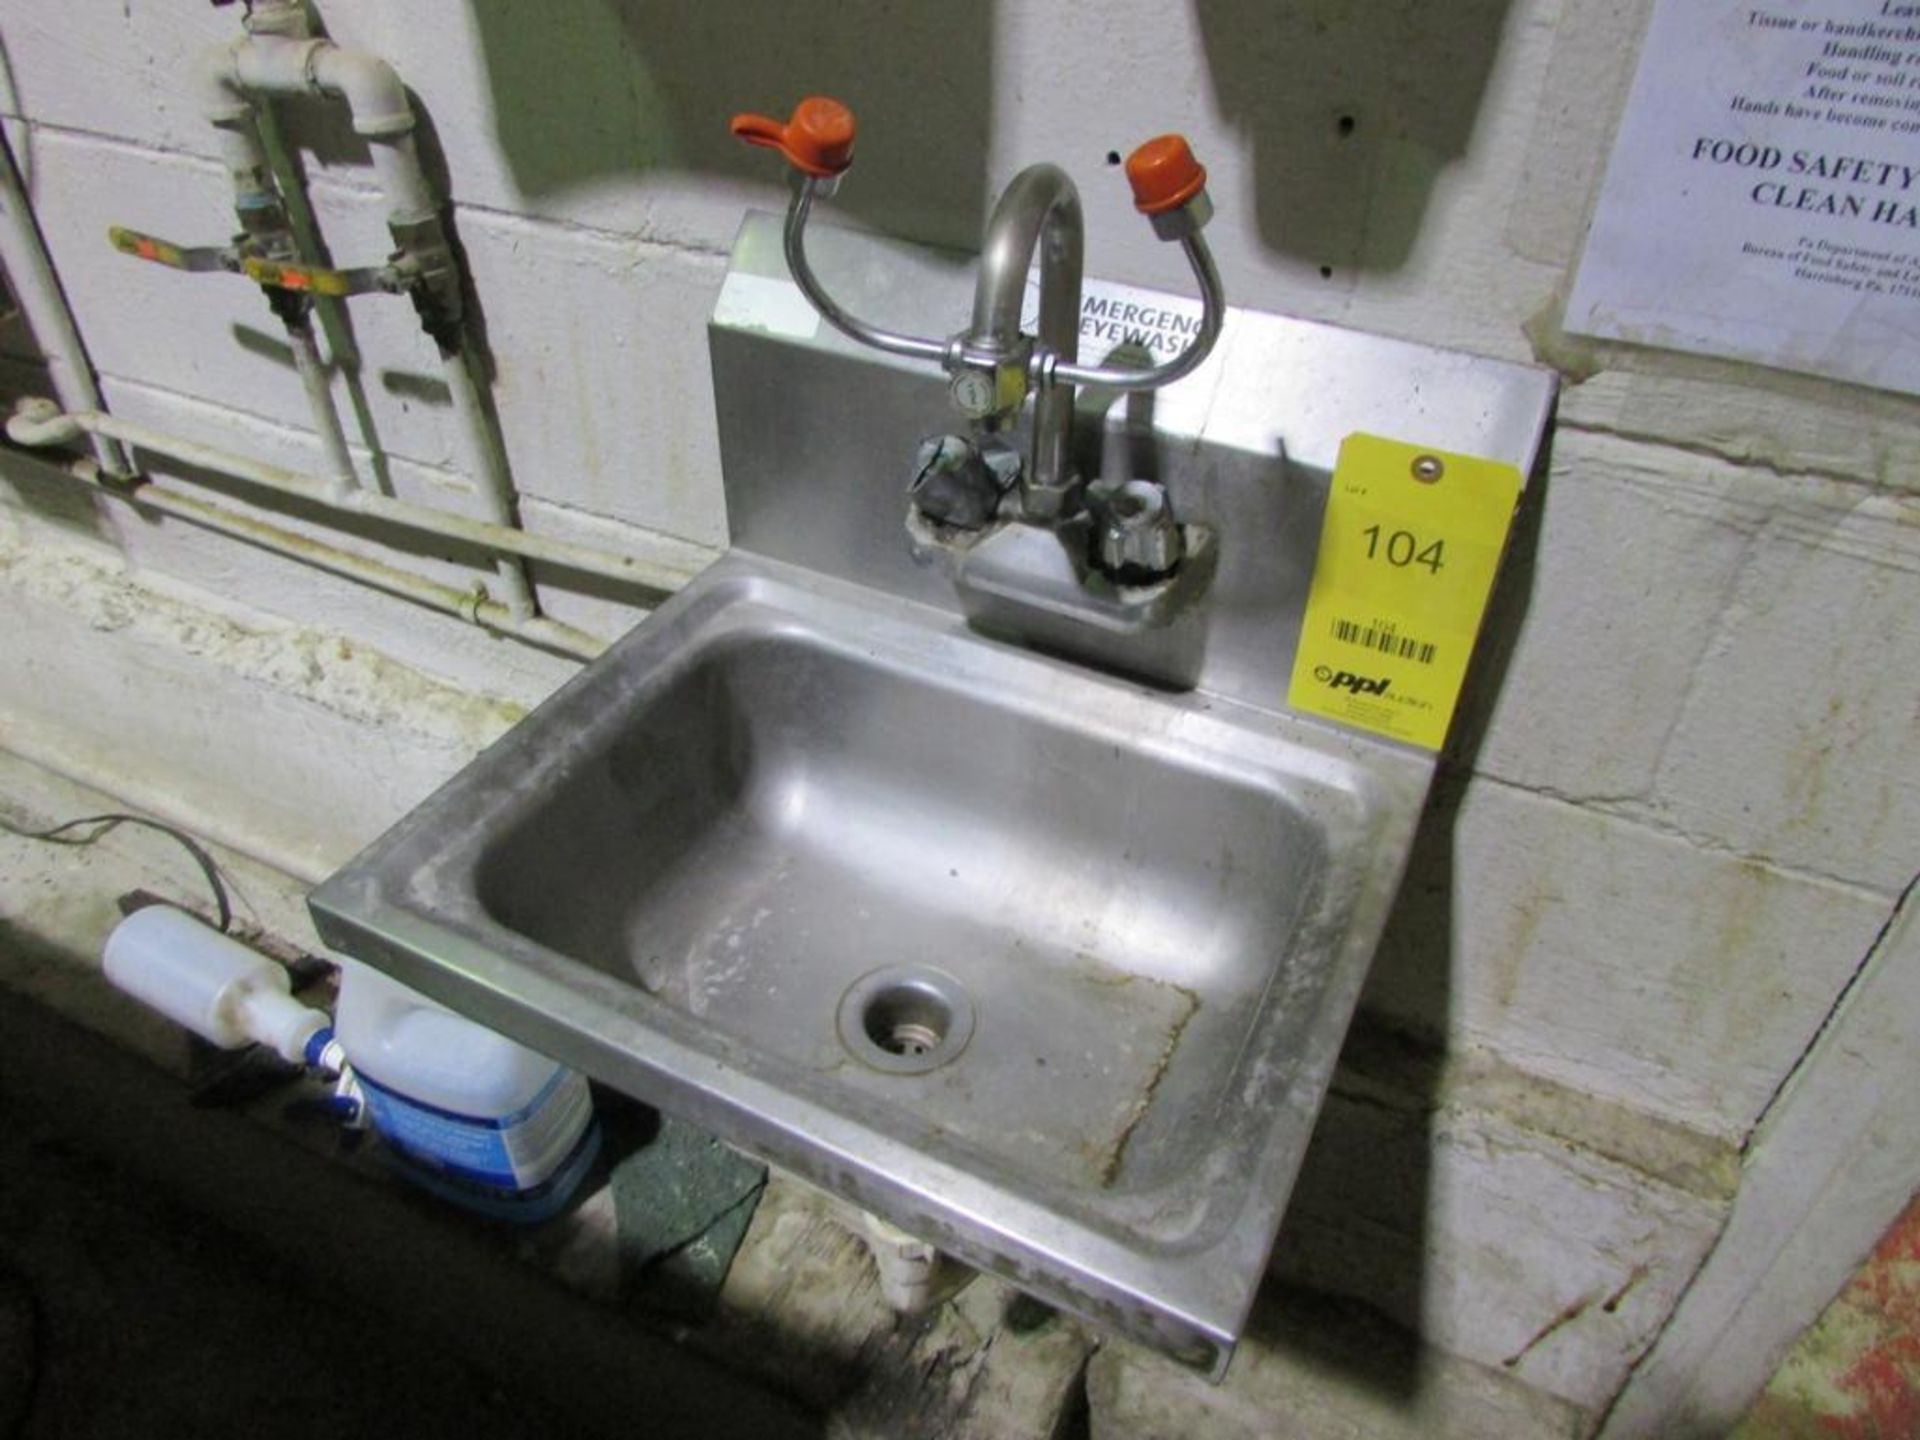 LOT: Stainless Steel Hand Sink with Emergency Eyewash Attachment, Soap and Paper Towel Dispensers, a - Image 2 of 3